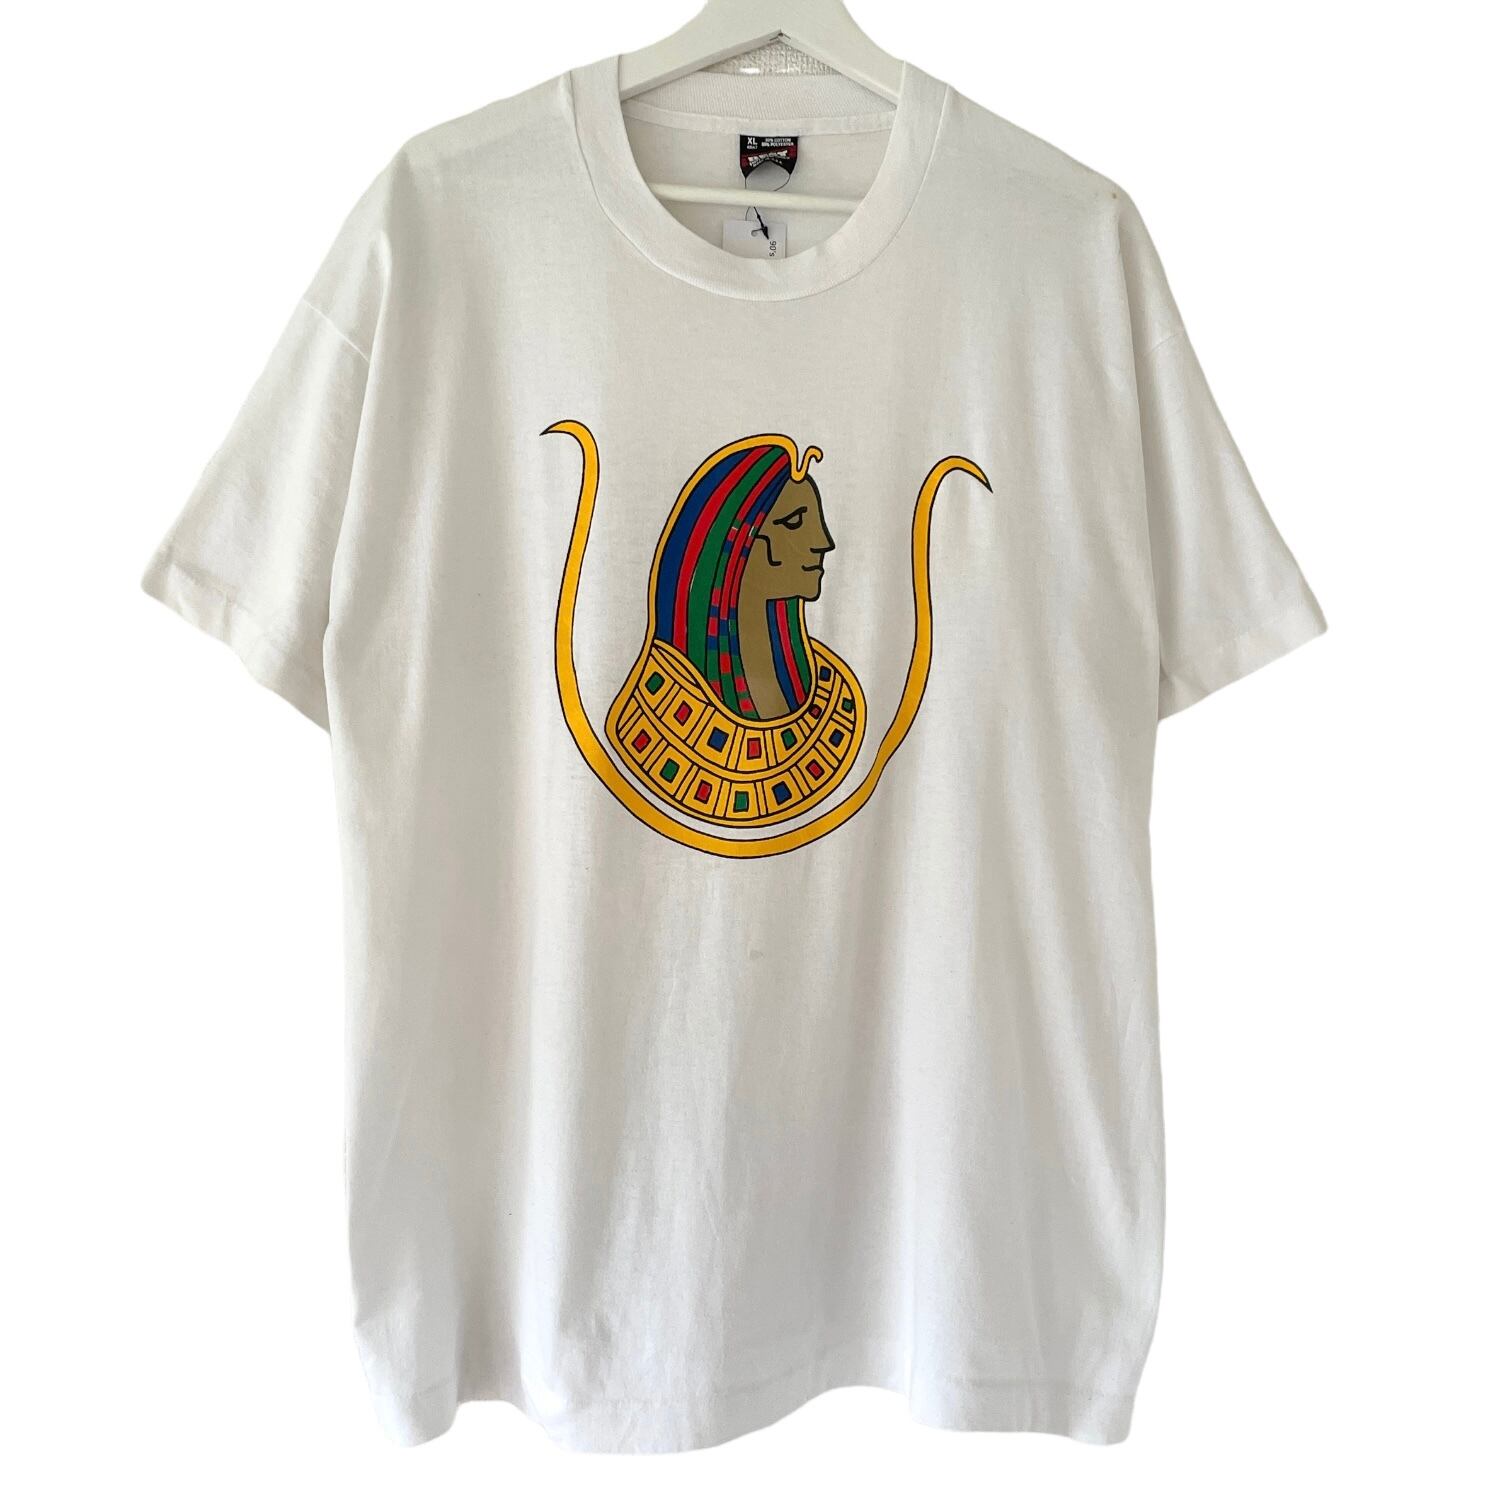 90's FRUIT OF THE LOOM BEST print tee made in USA【XL】